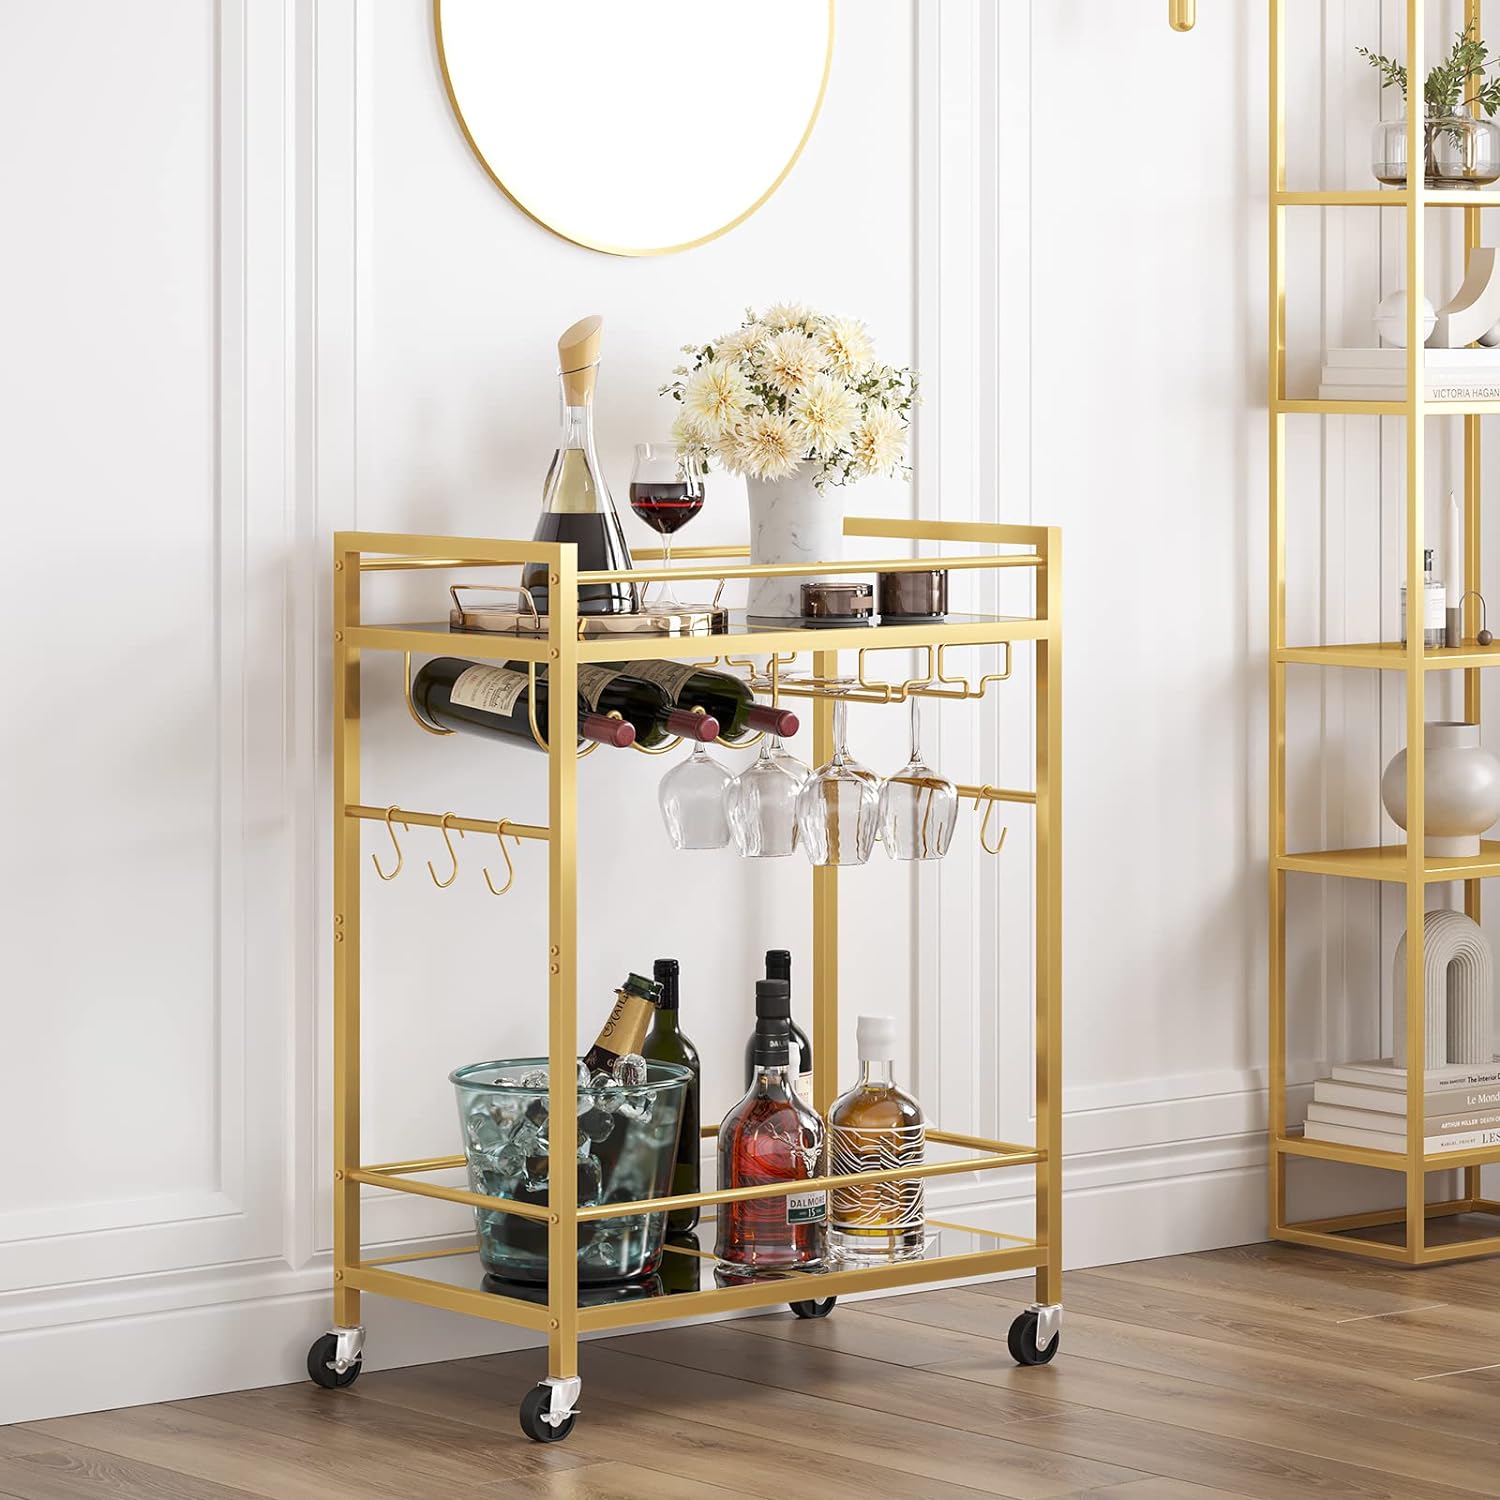 I got this bar cart to add it to mydecoration. It arrived just in time. It was really easy to assemble and the materials looks of good quality. Everything is perfect. It looks so good.